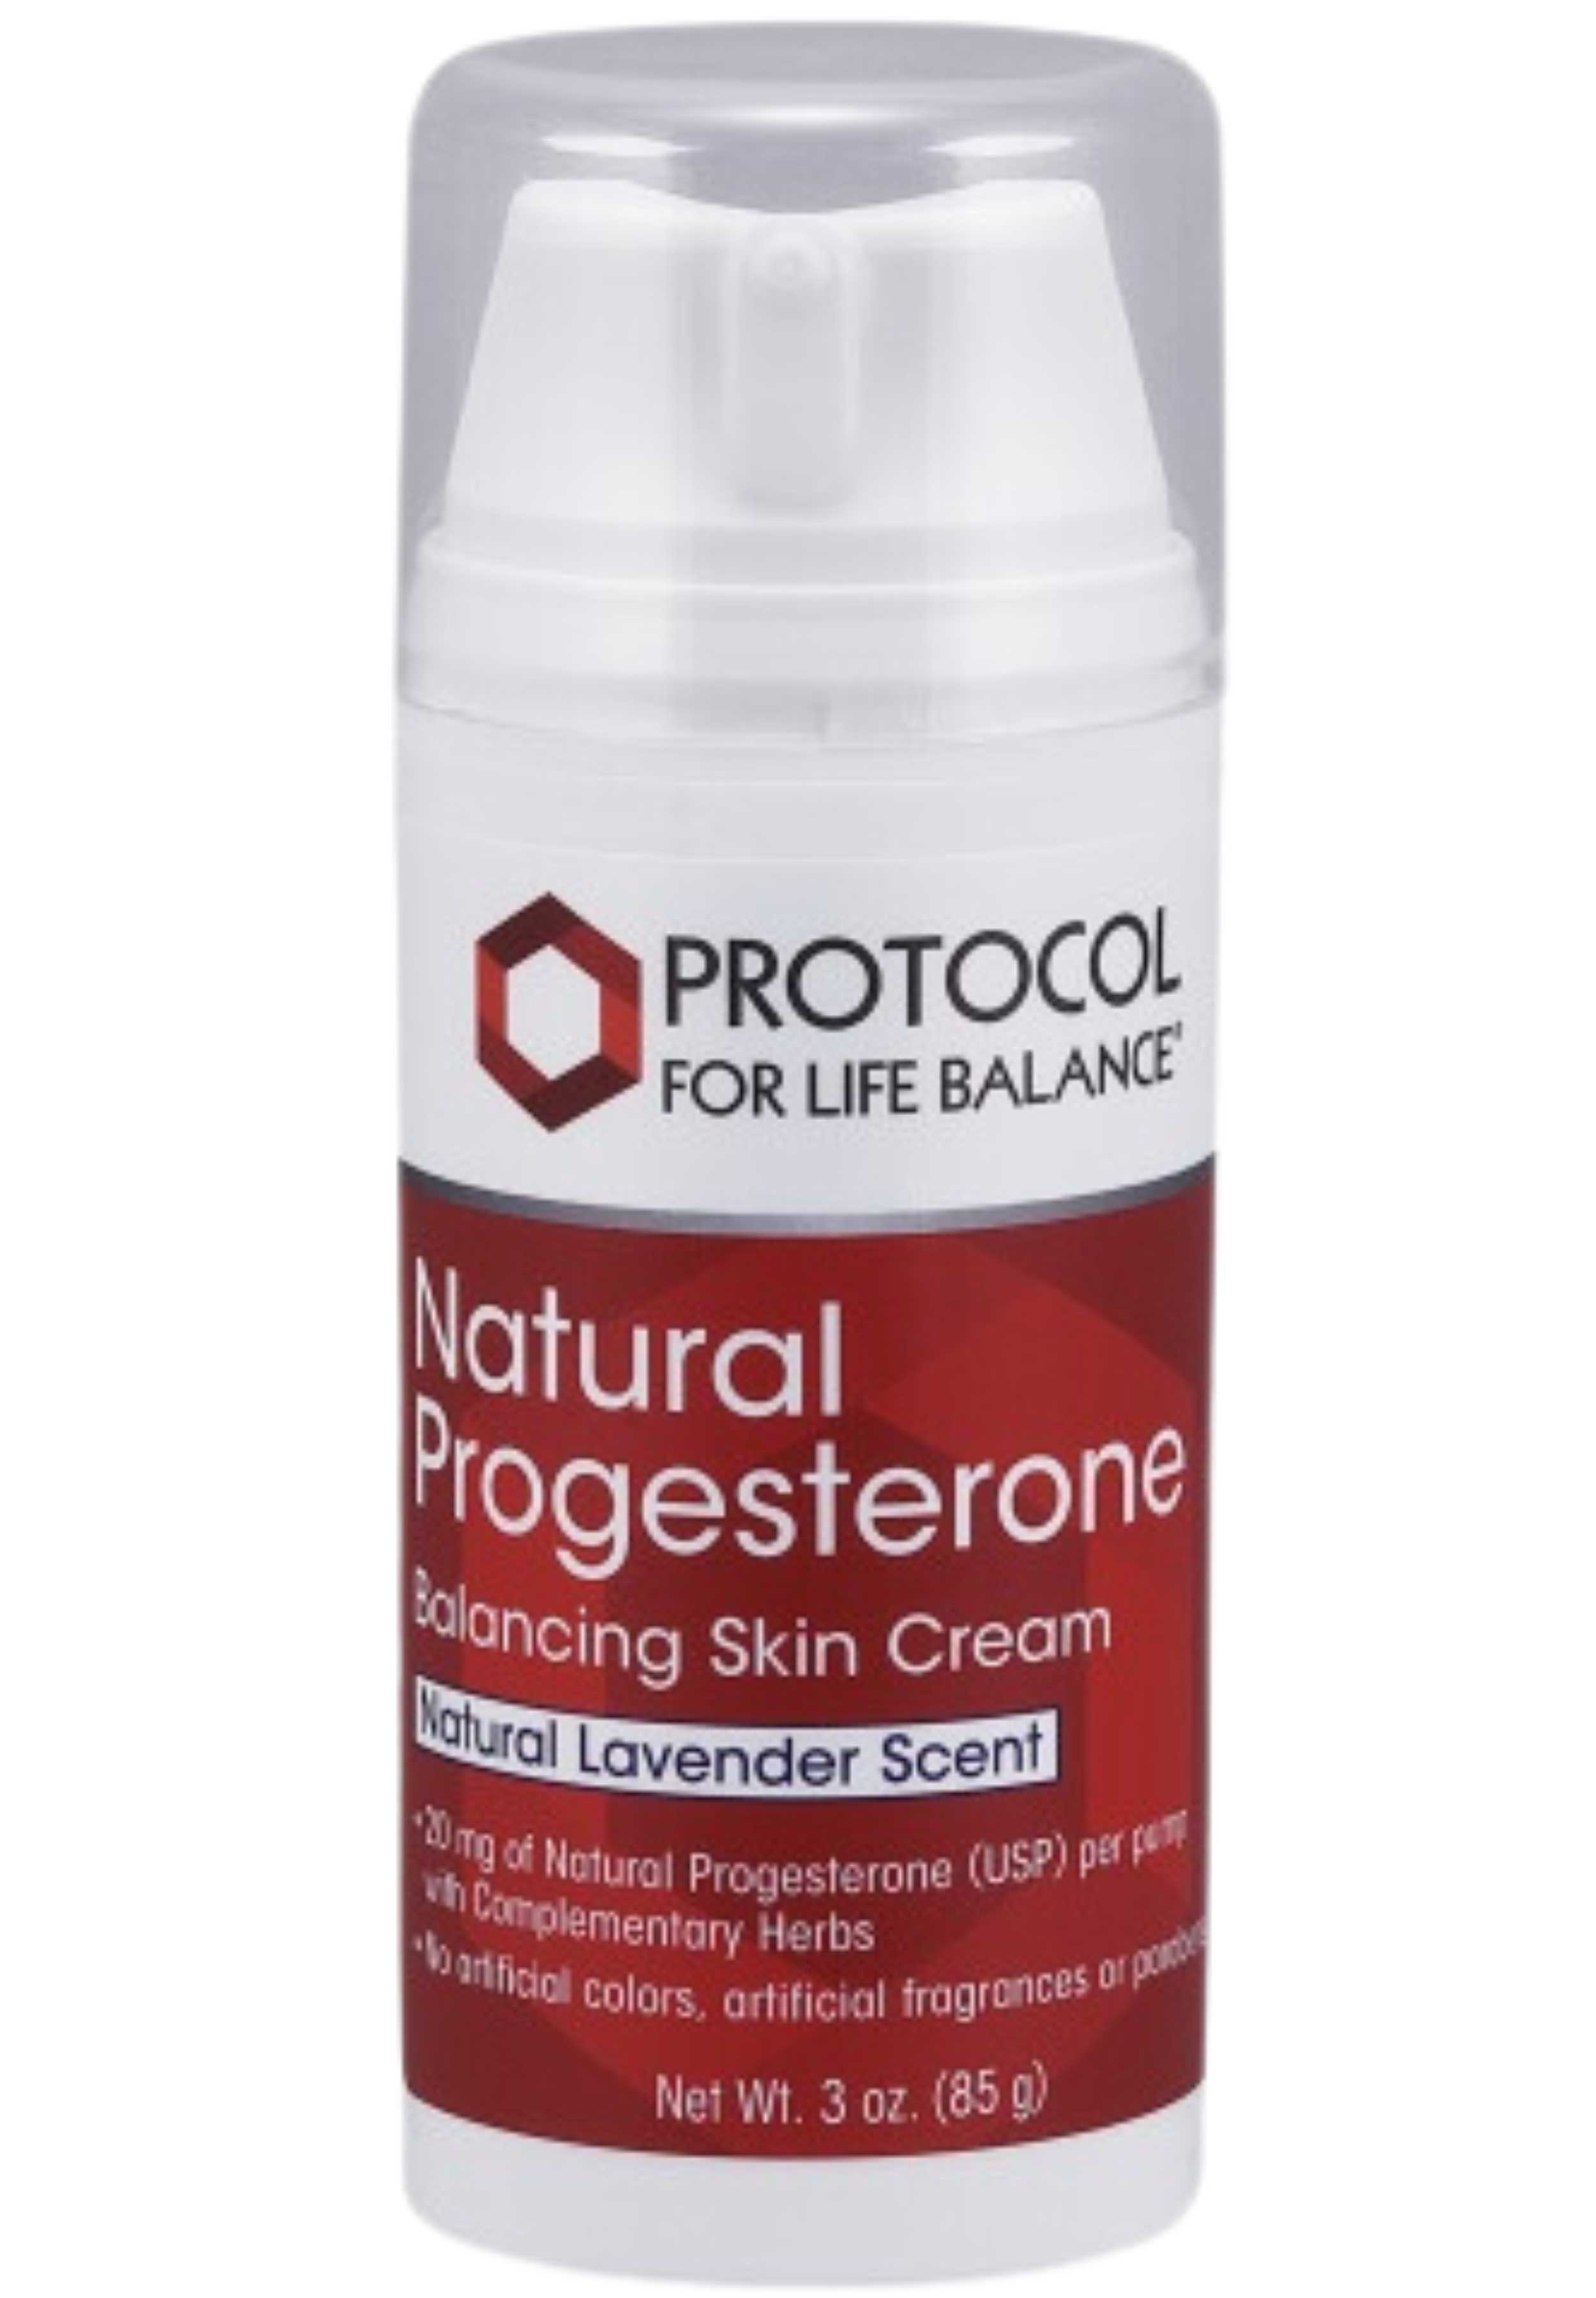 Protocol for Life Balance Natural Progesterone from Wild Yam Lavender Scent